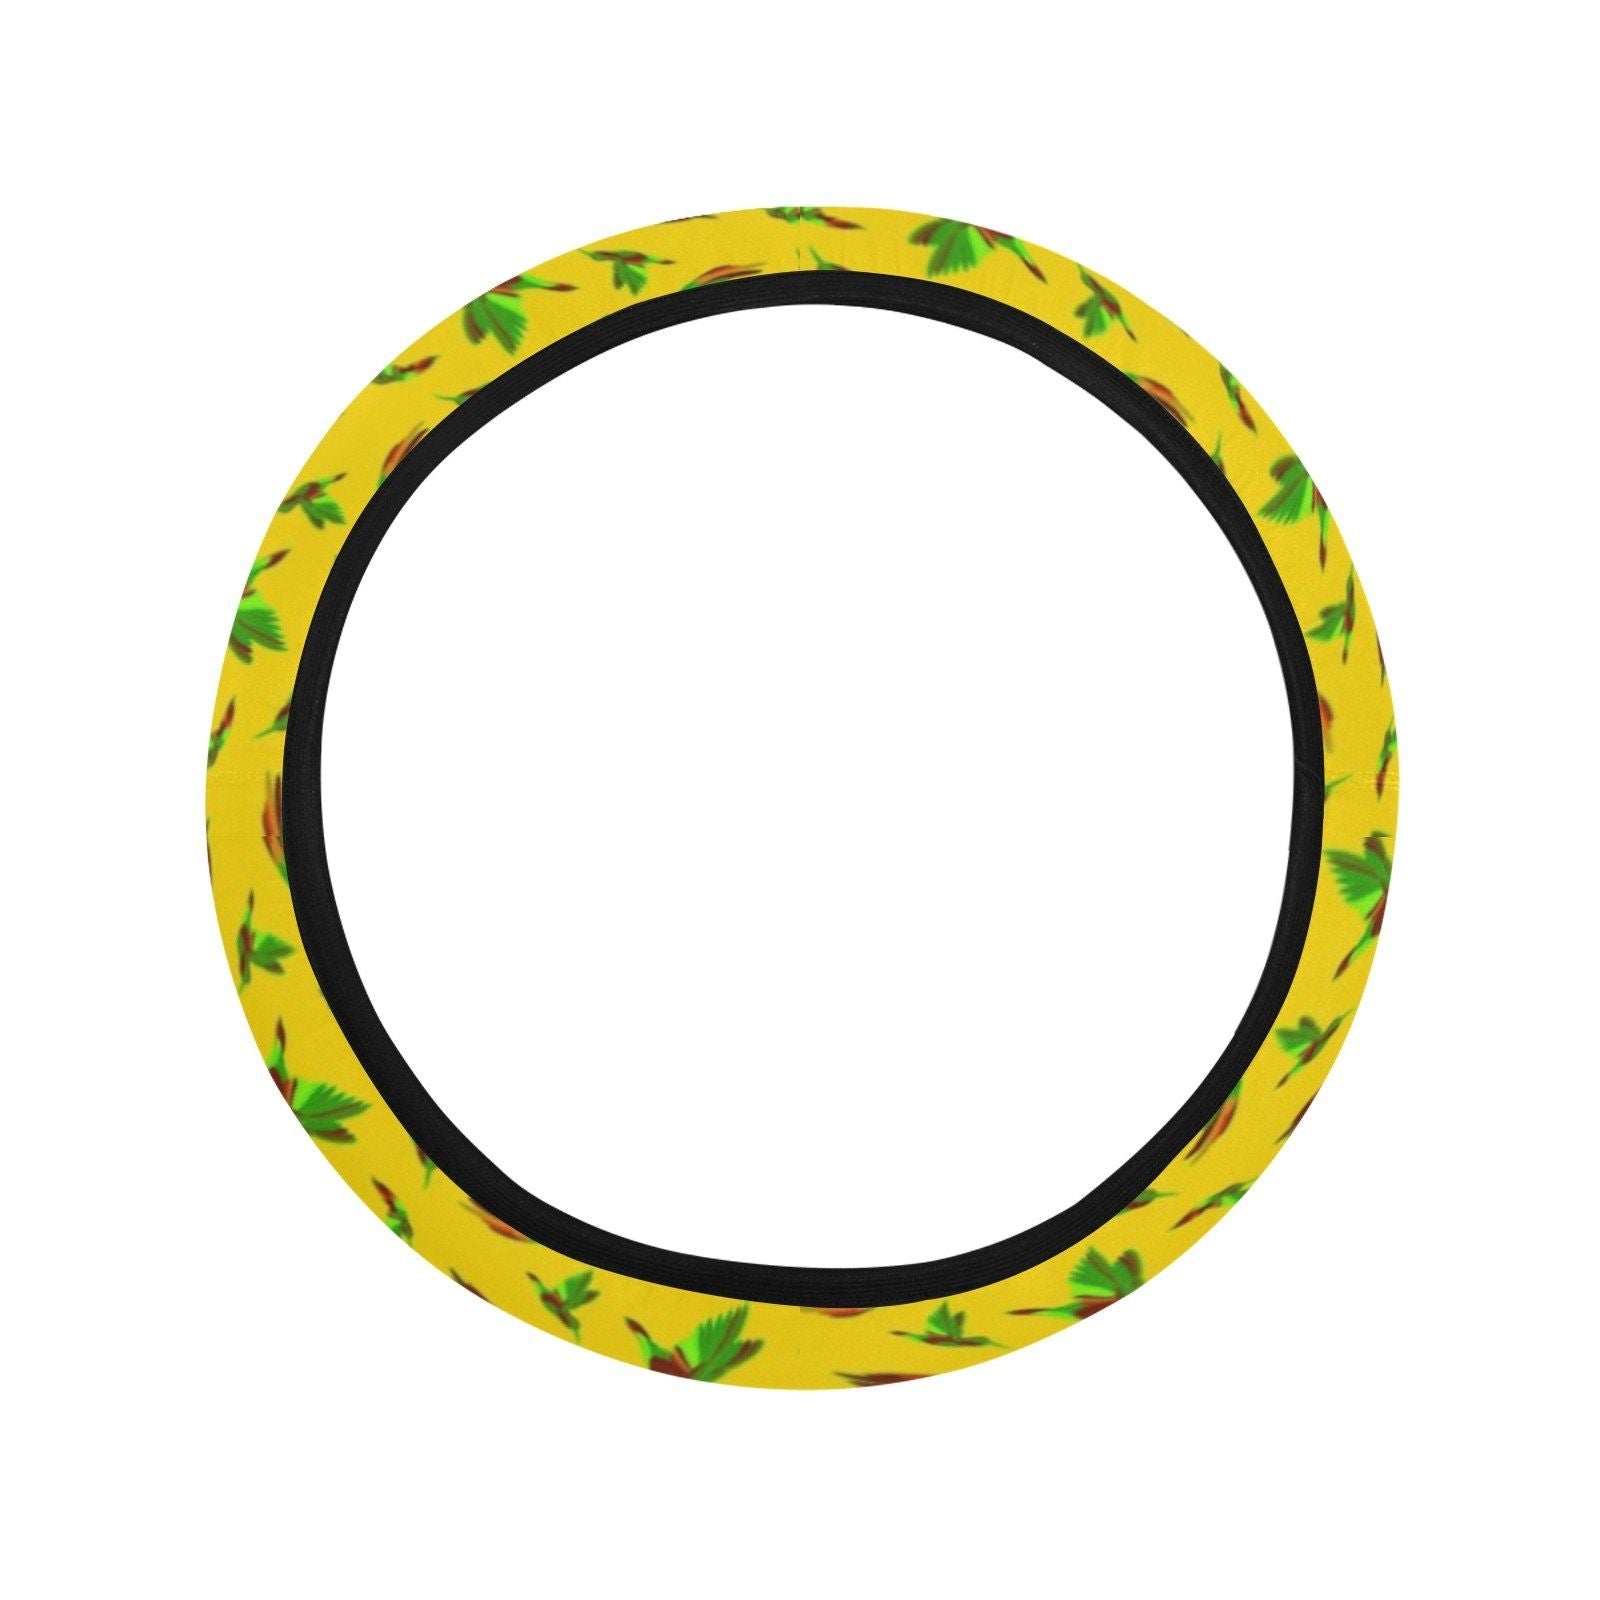 Red Swift Yellow Steering Wheel Cover with Elastic Edge Steering Wheel Cover with Elastic Edge e-joyer 